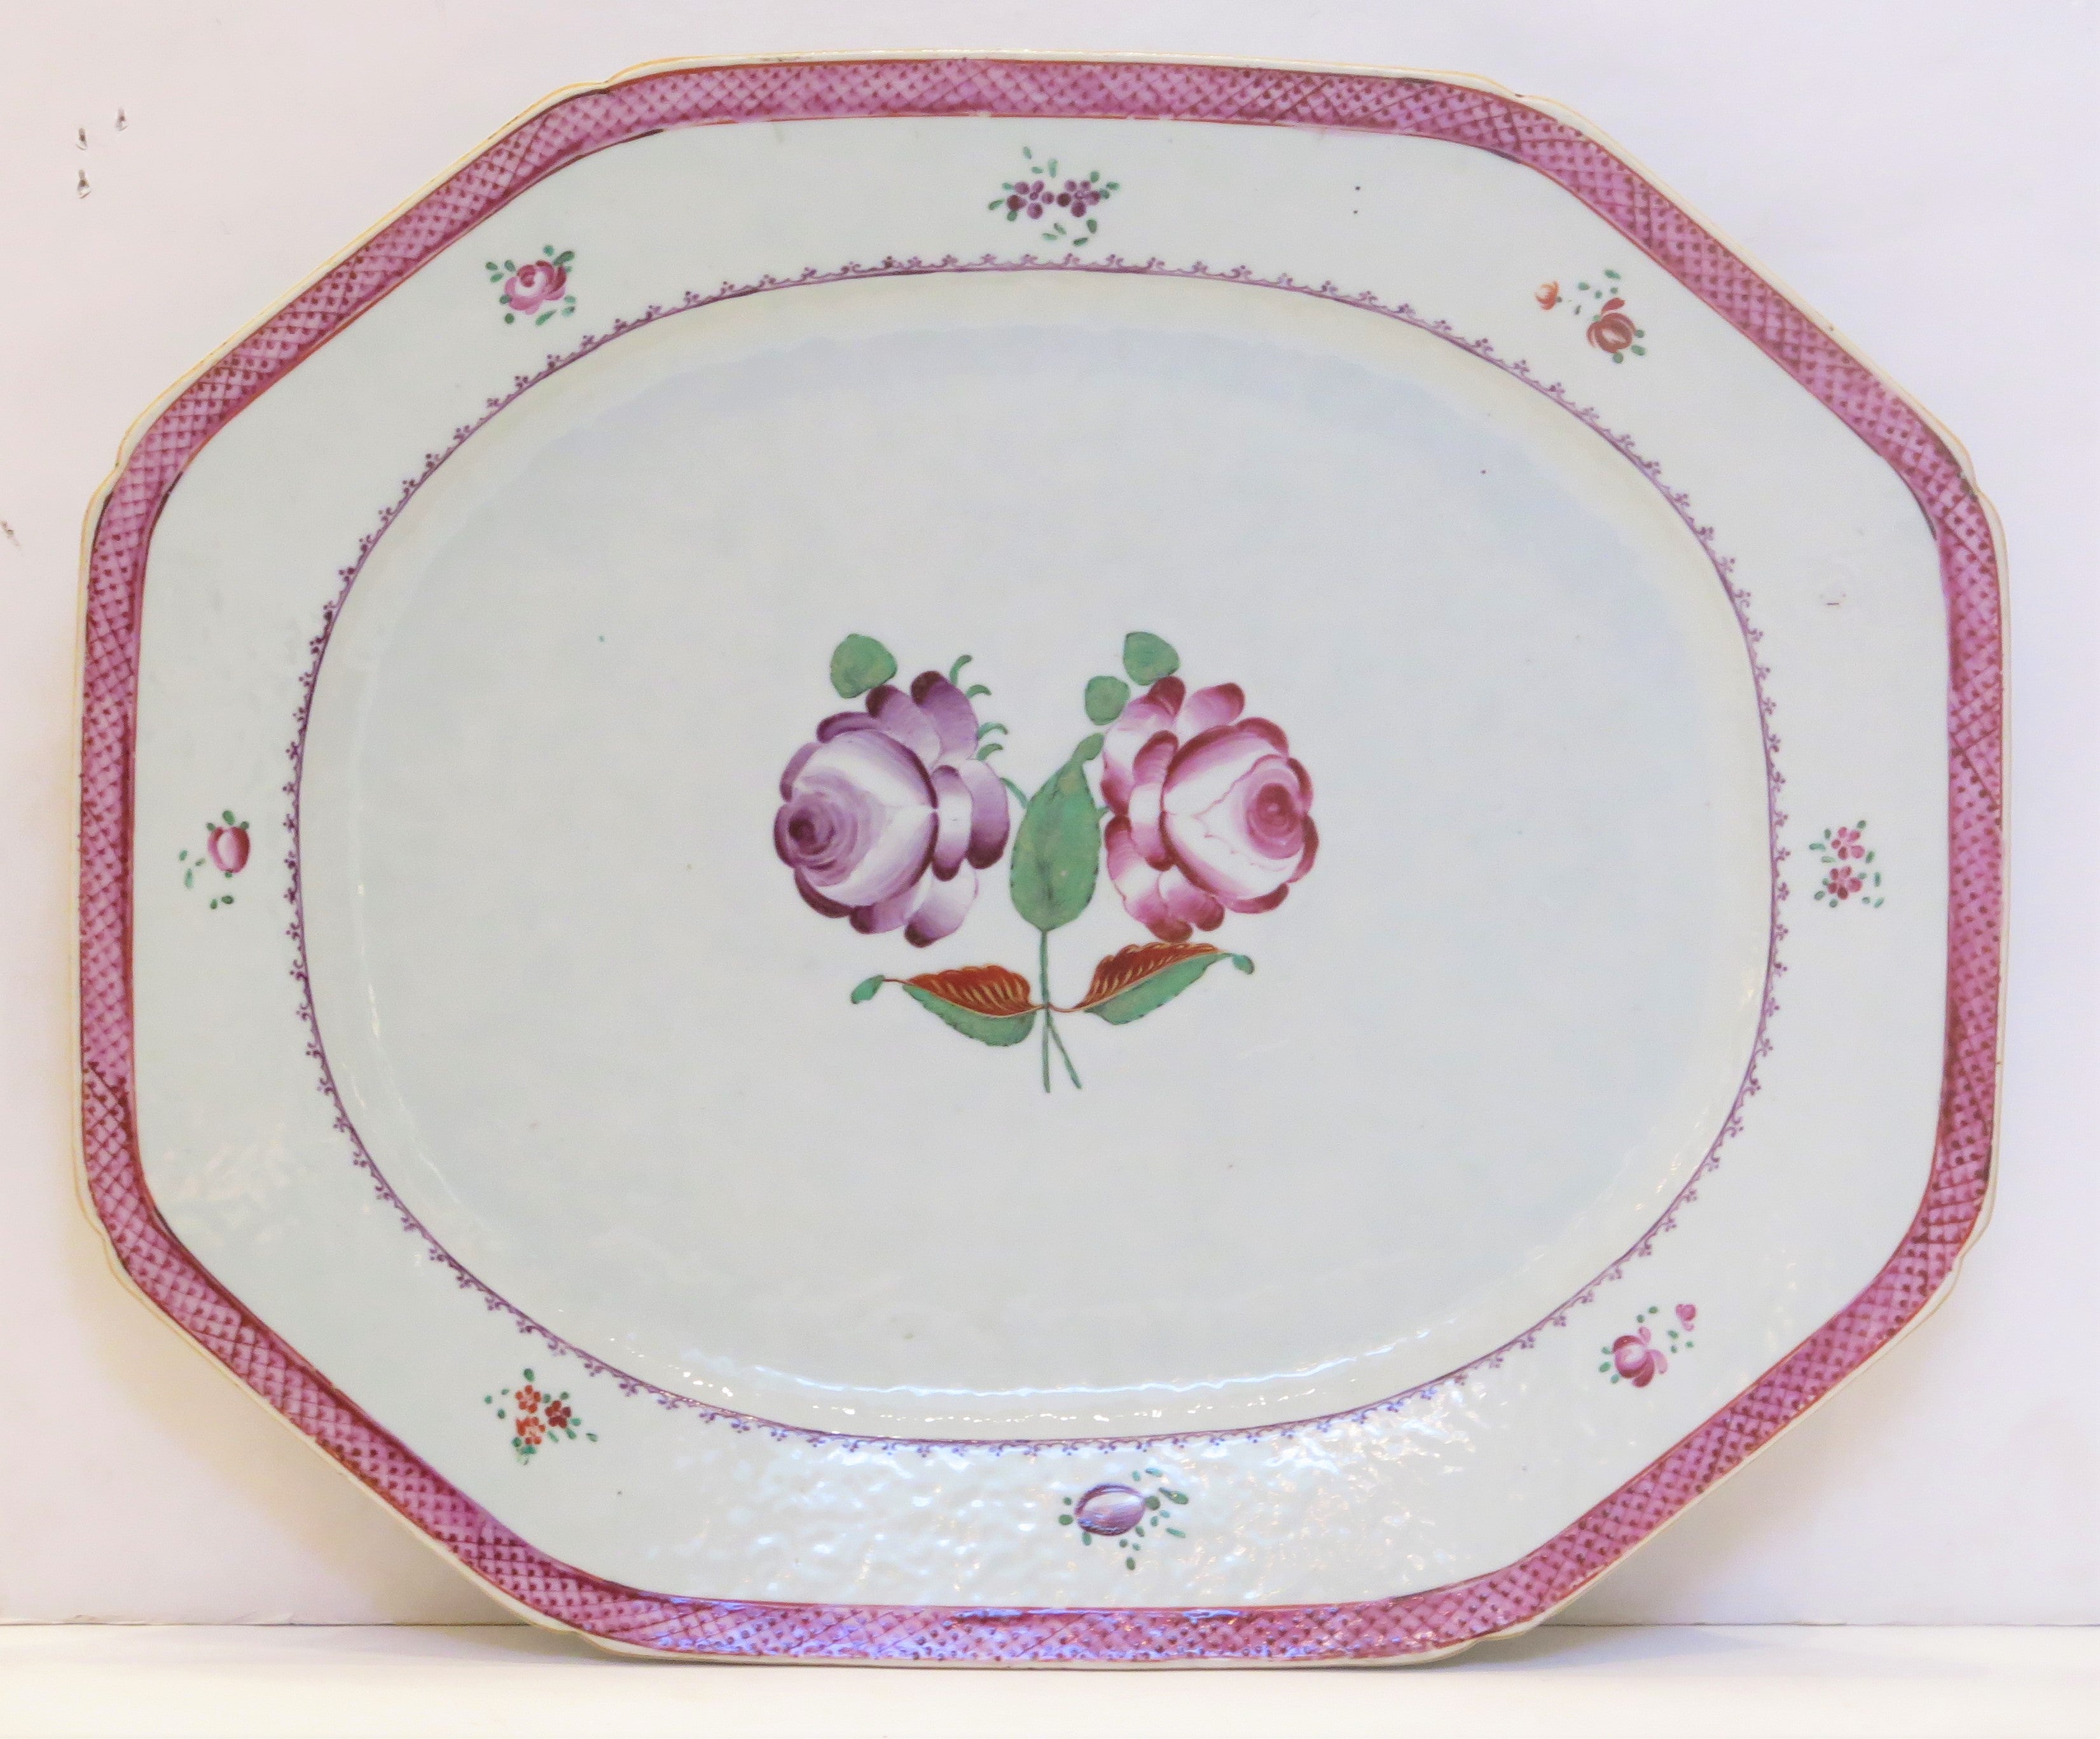 Chinese Export Platter with Elongated Octagonal Form